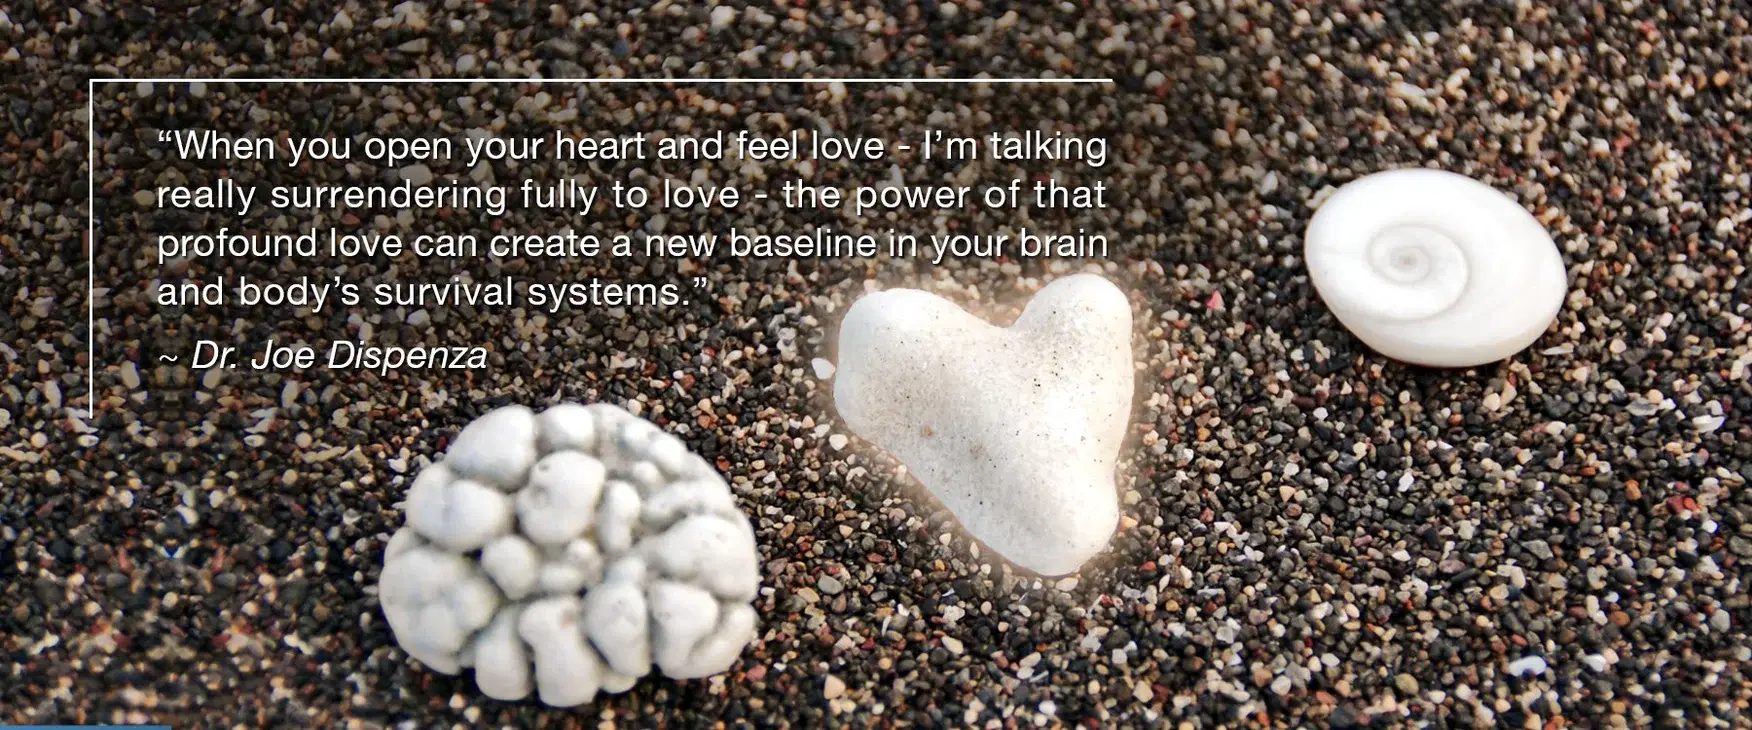 Creating a New Baseline of Love Begins in the Heart